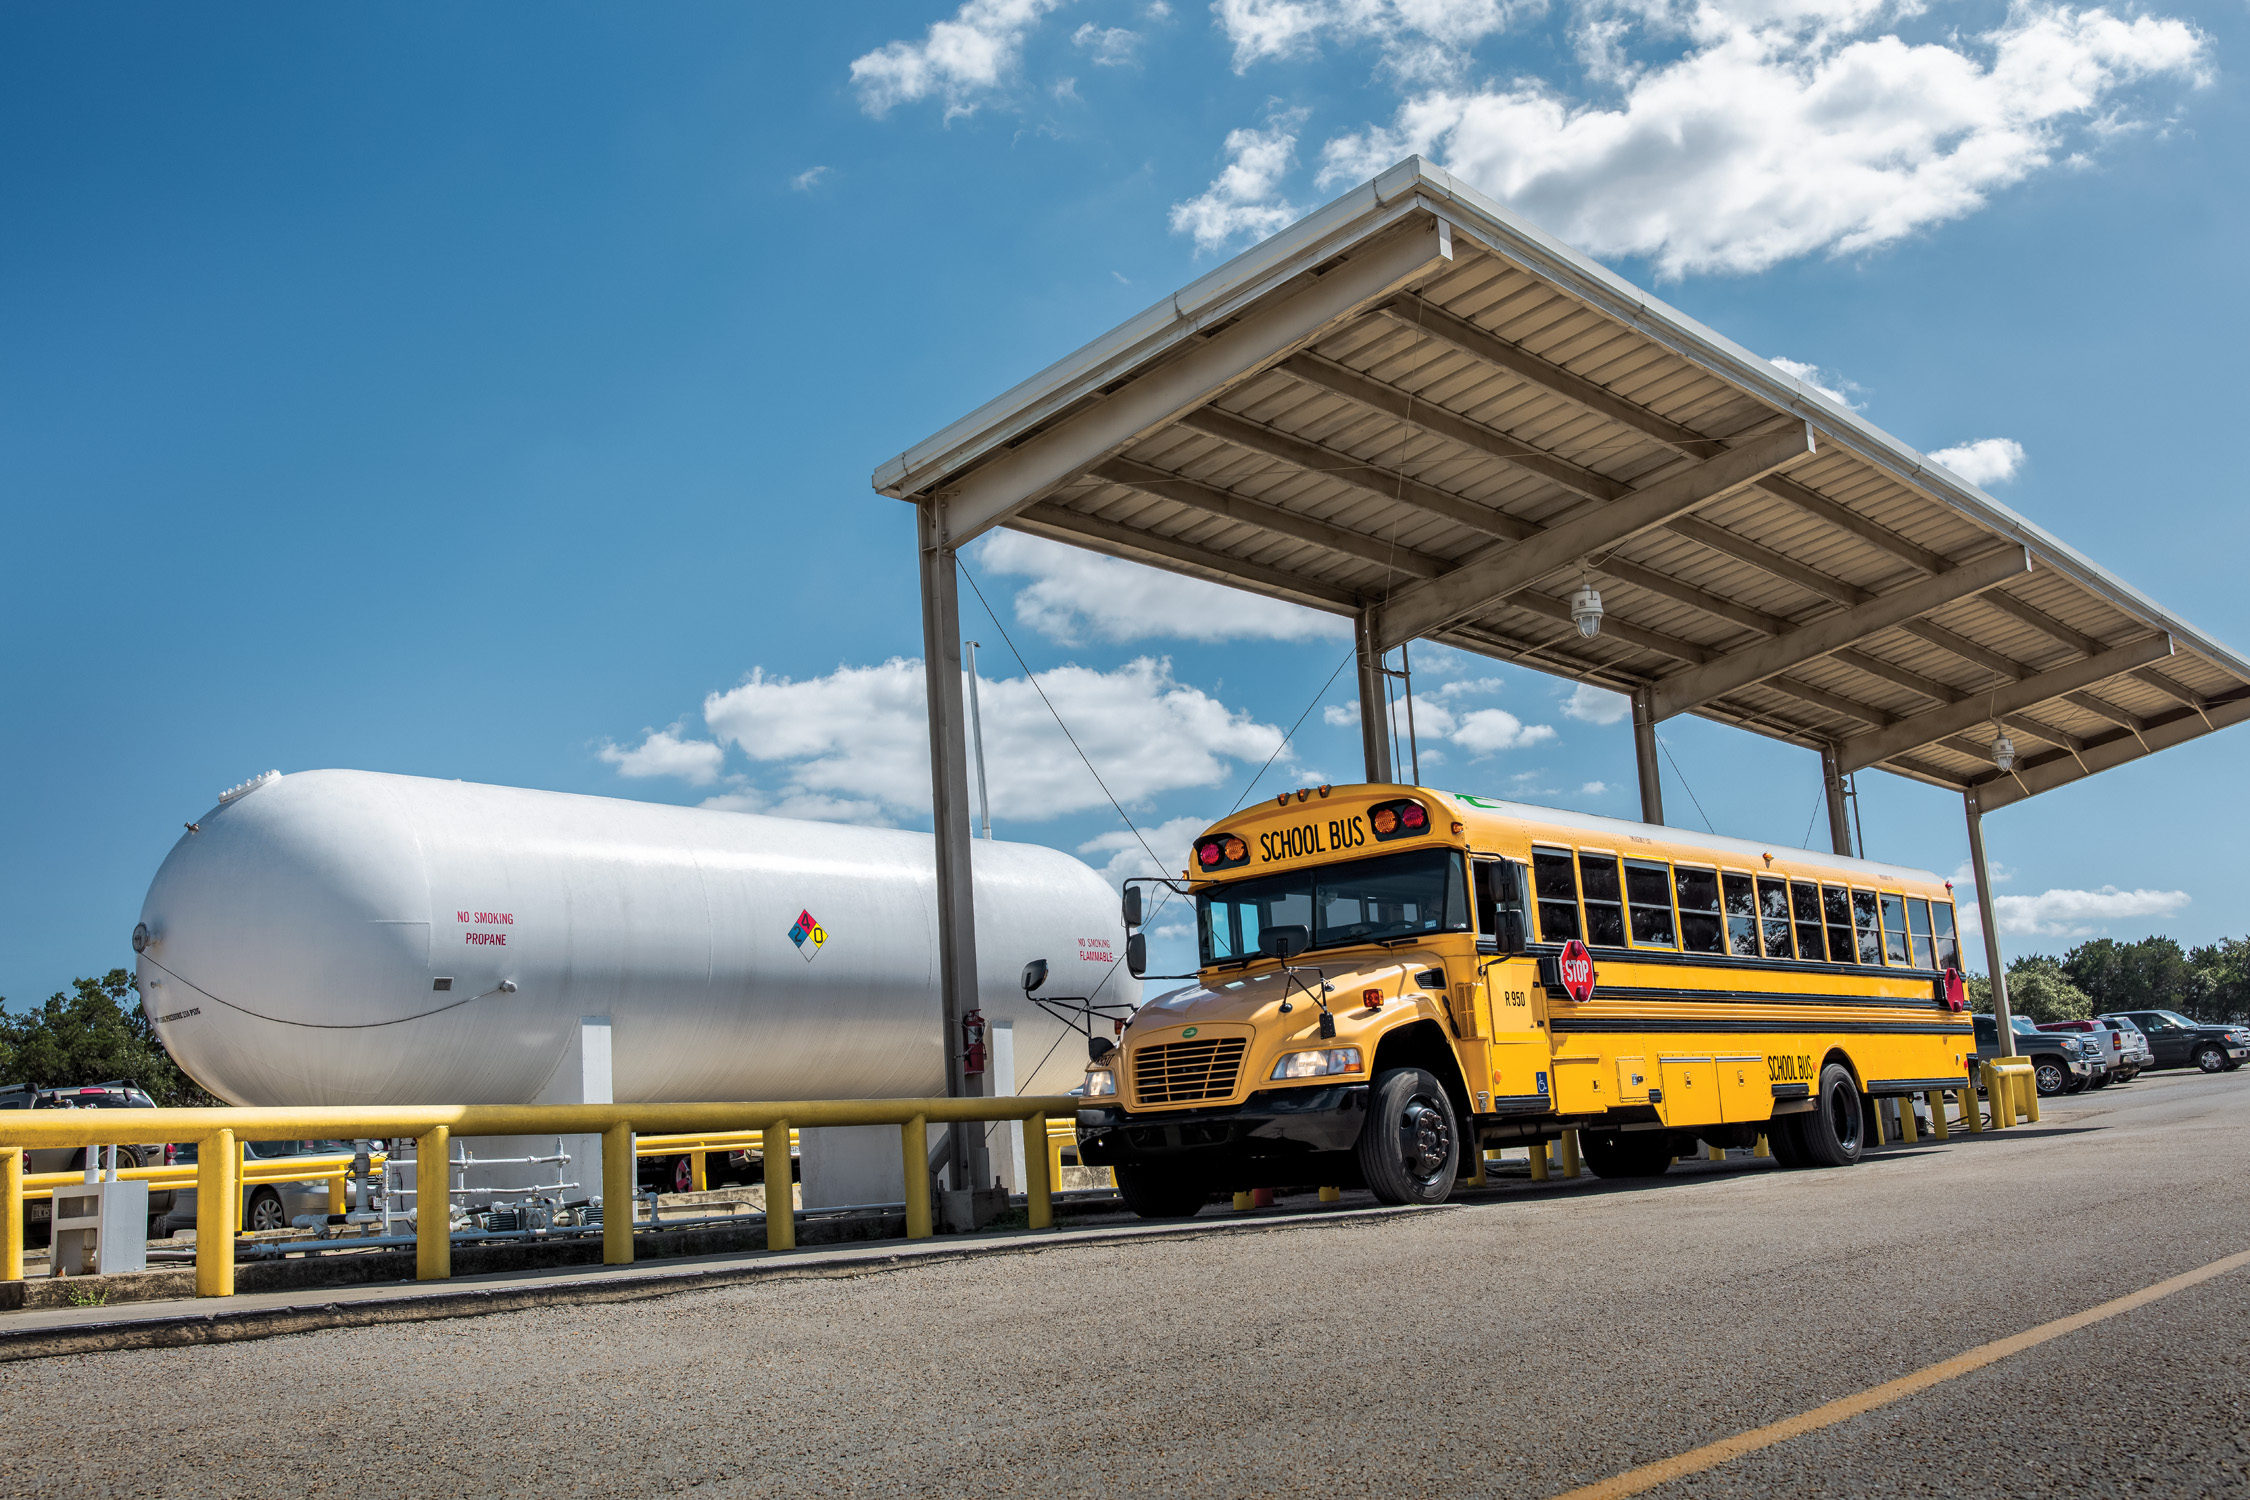 20 Thousand Zero Emissions Propane Autogas School Buses Taking Students to schools in USA 2020